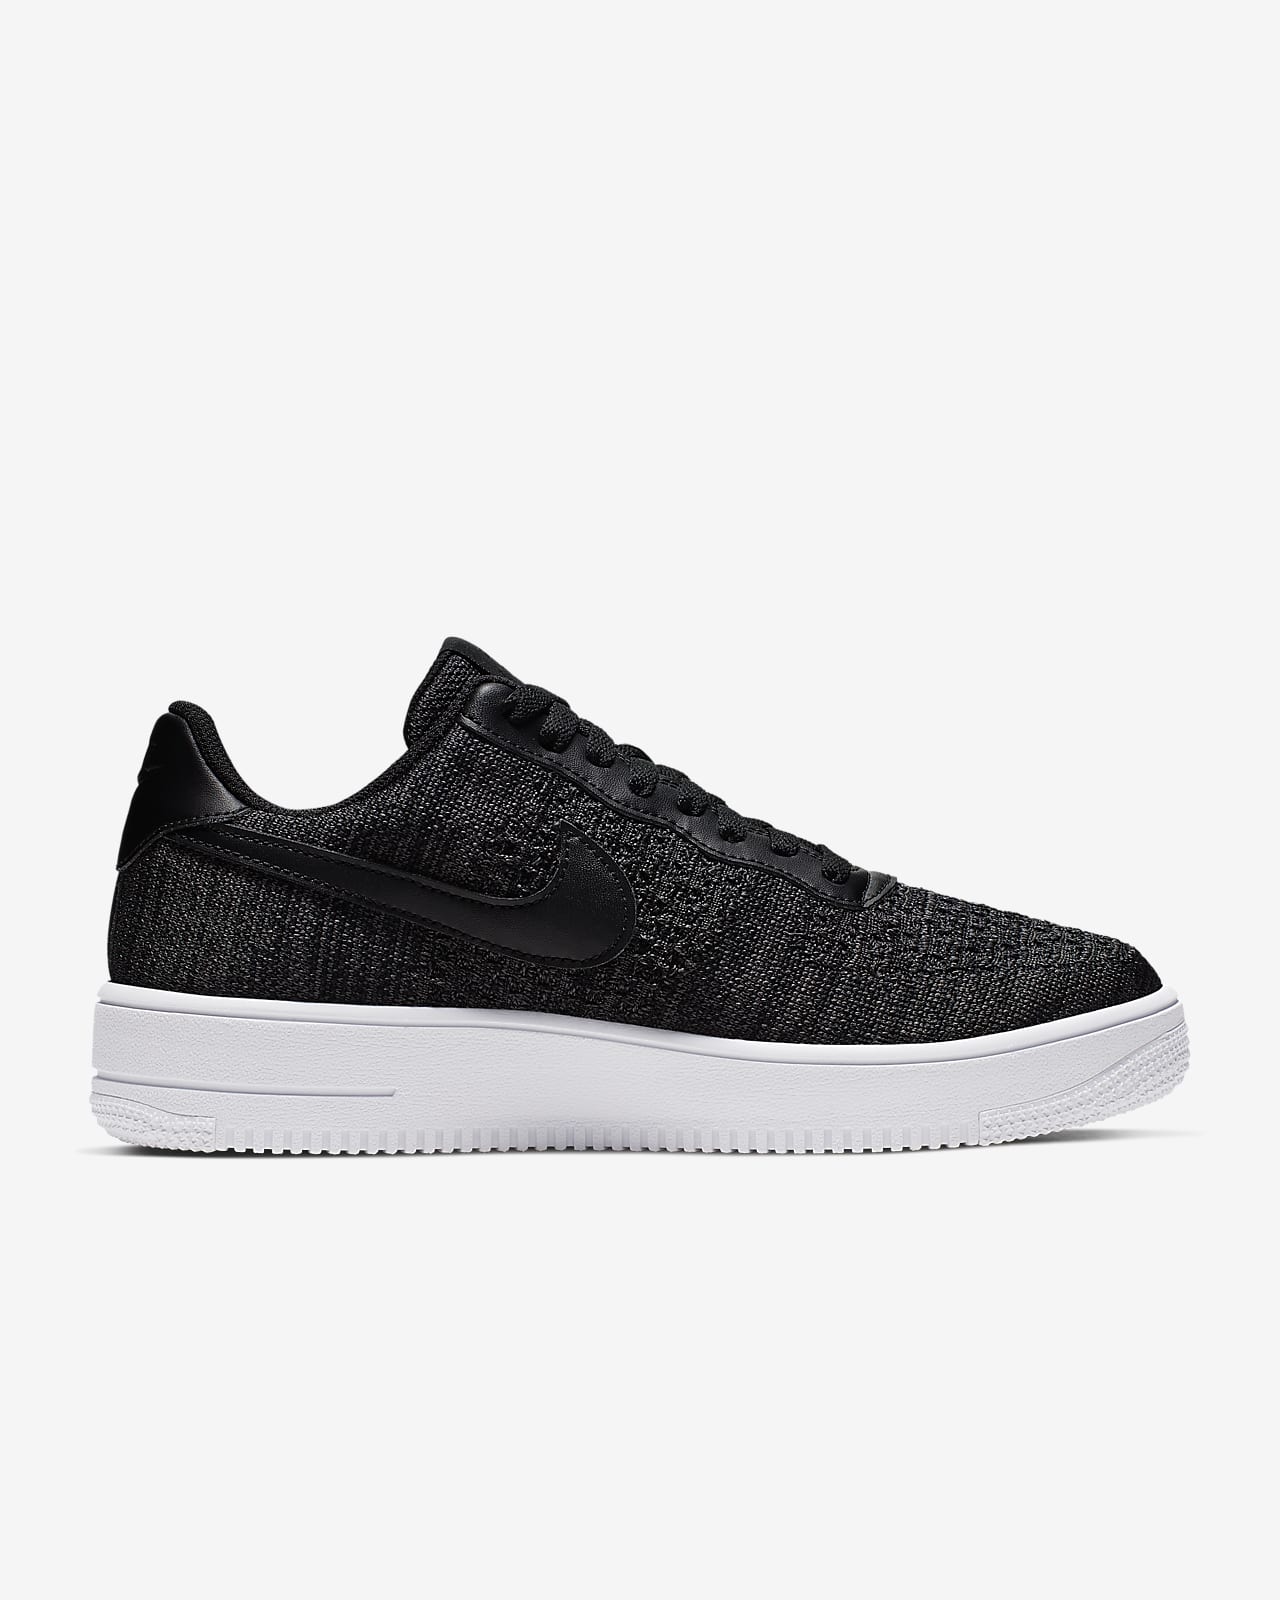 nike air force 1 hombre negro